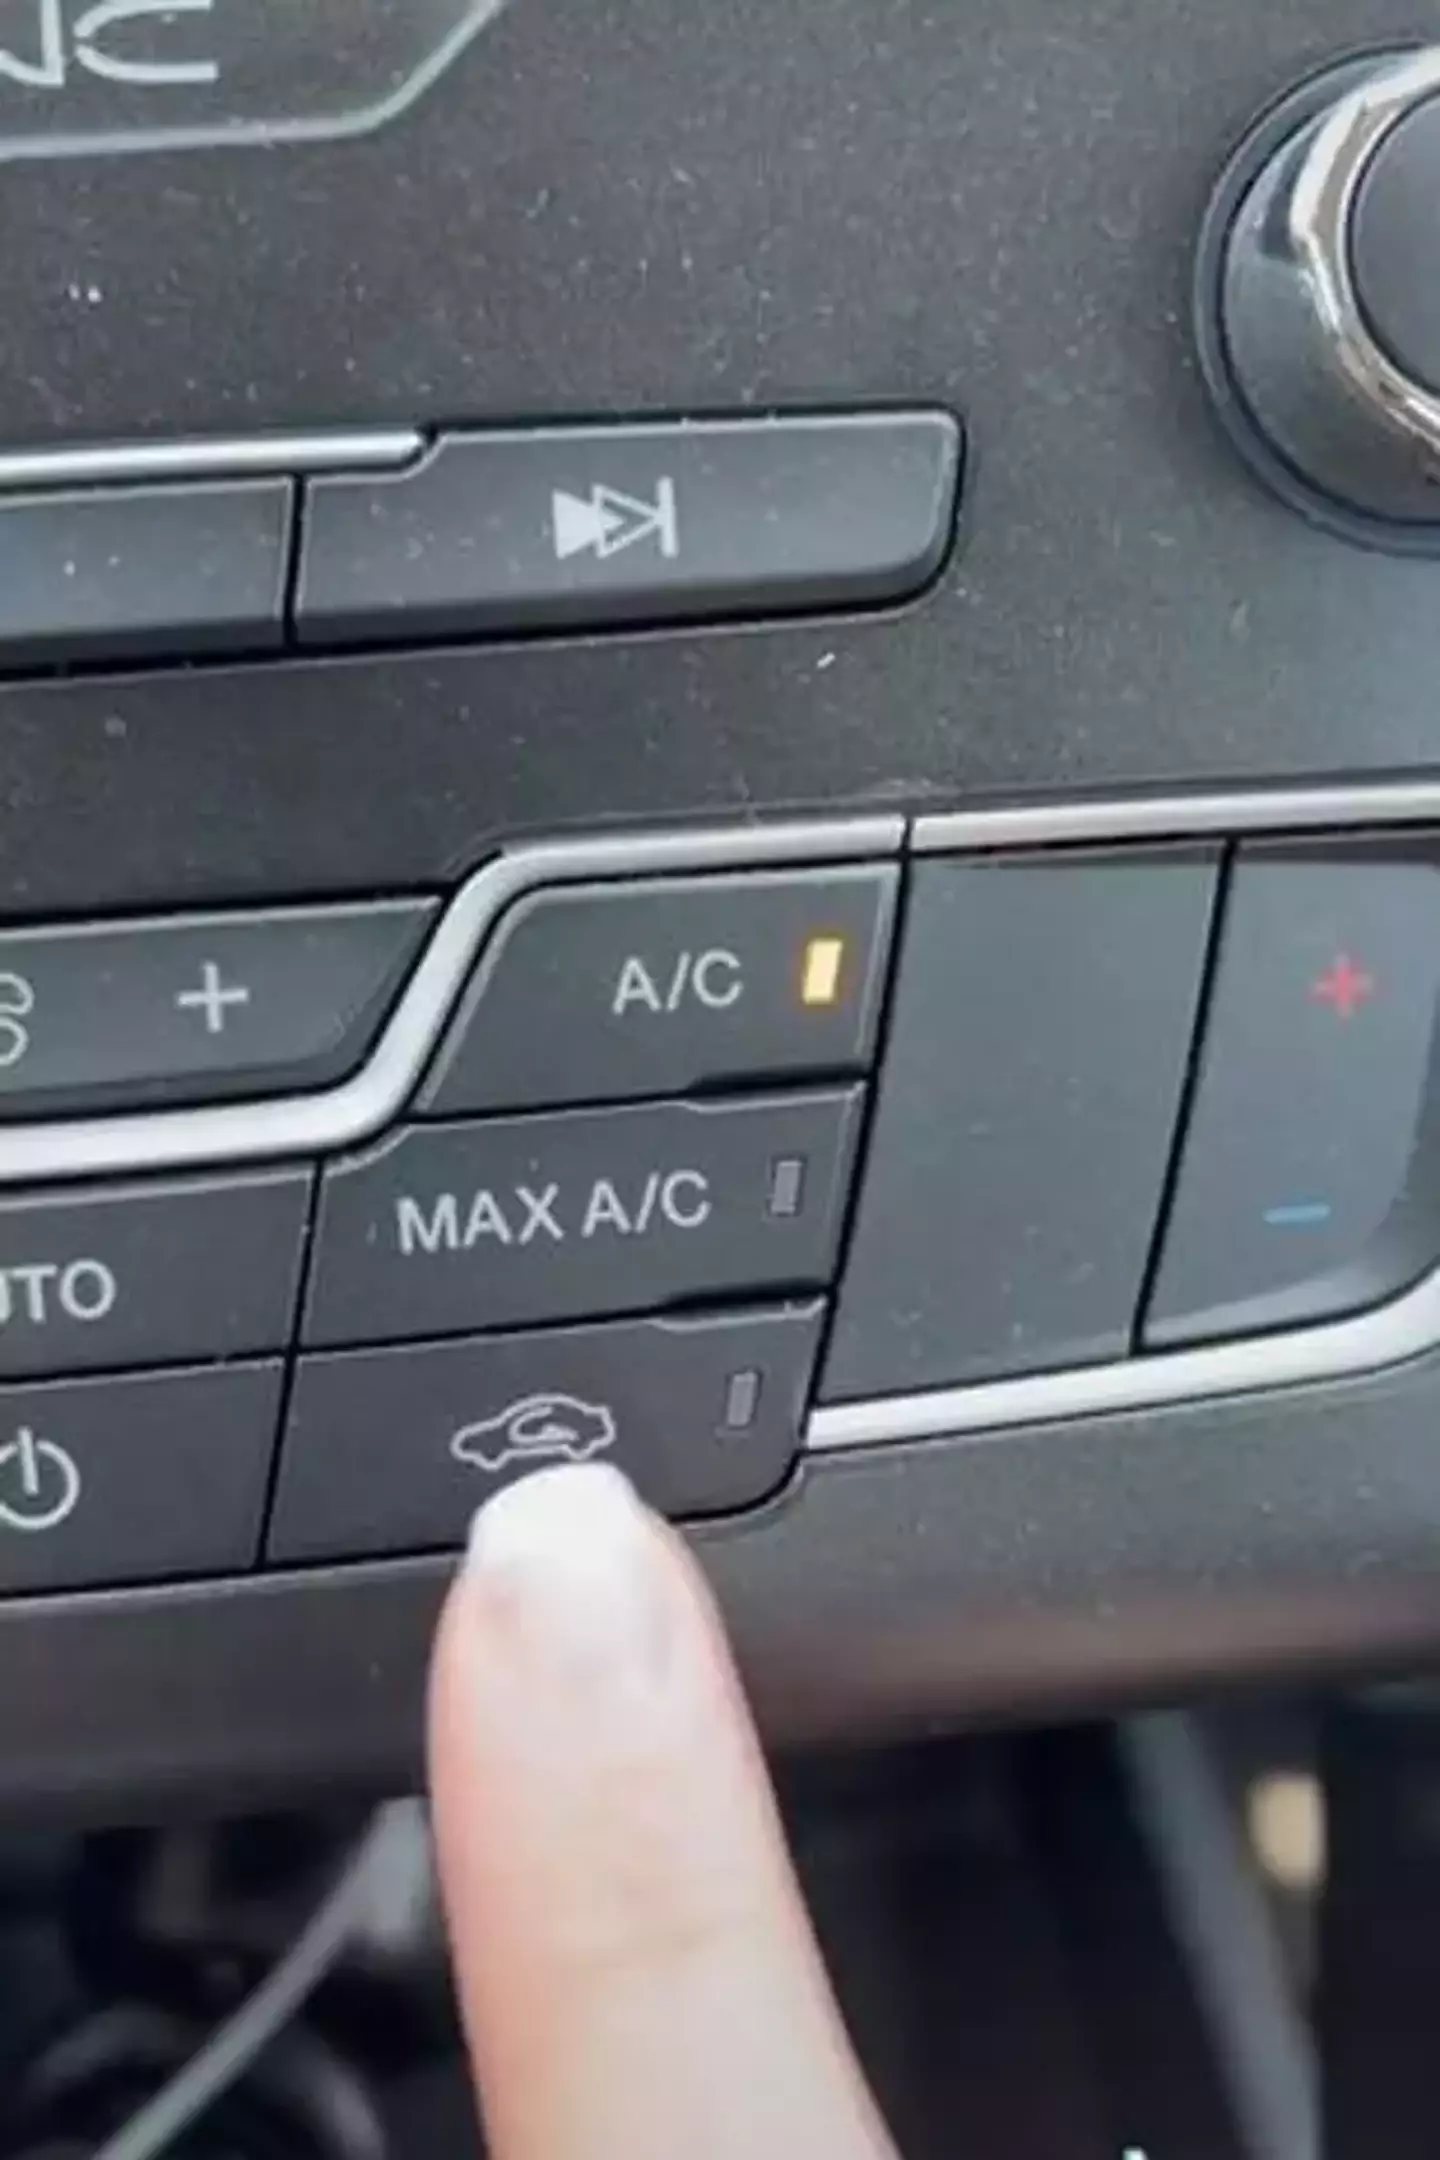 TikToker @megansbubble has gone viral for stunning motorists with her video: "Car tips and tricks. I bet you didn't know what this car button is actually used for."